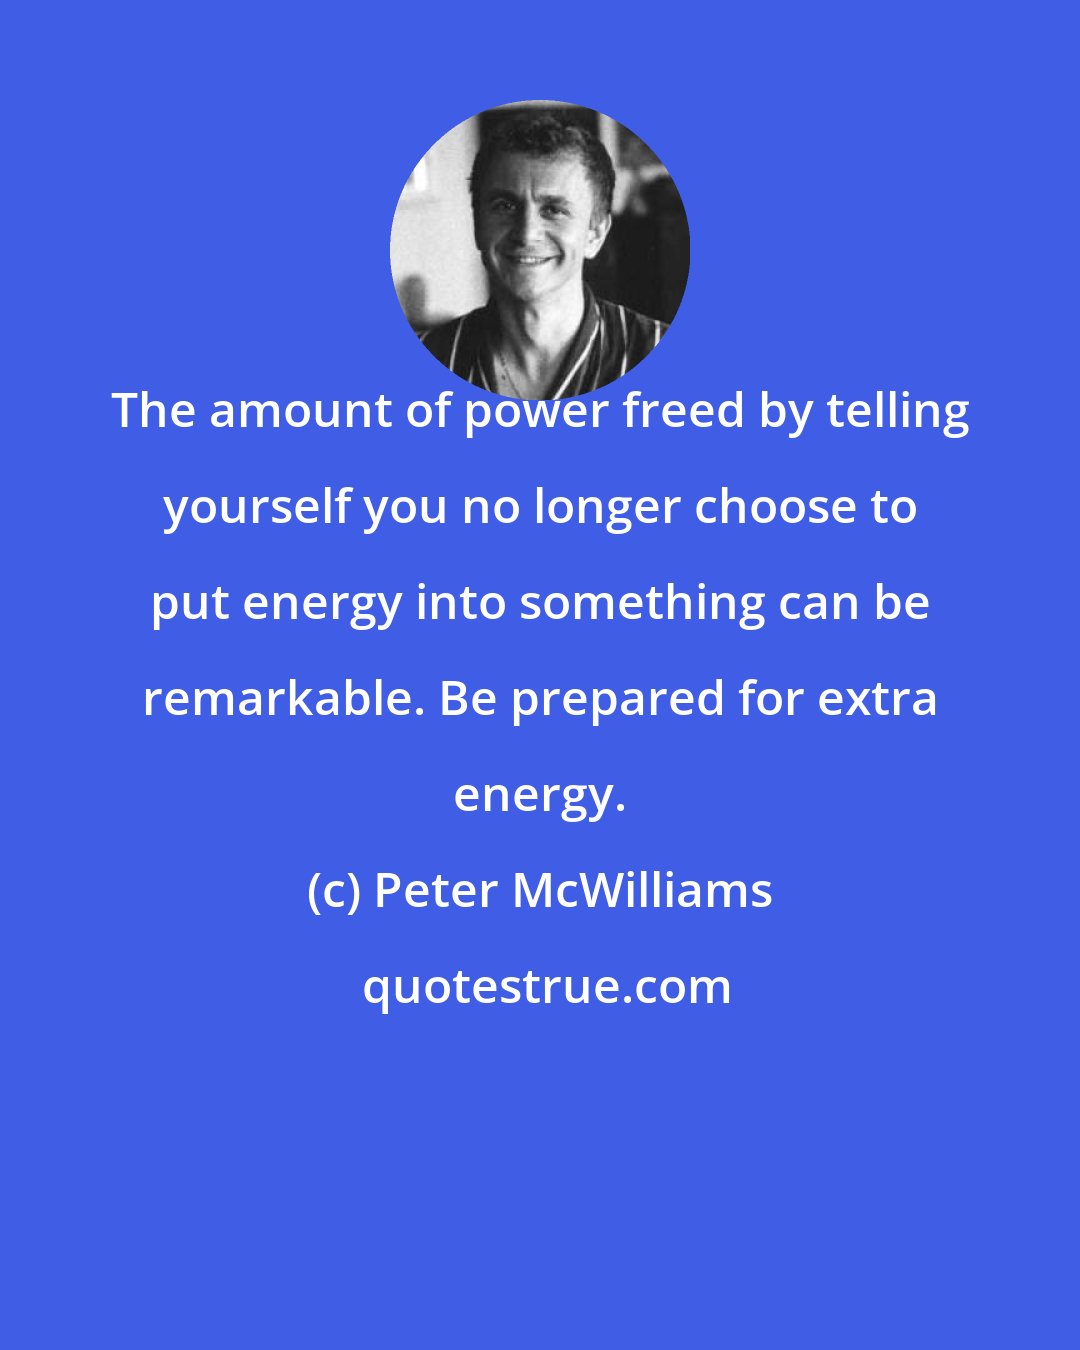 Peter McWilliams: The amount of power freed by telling yourself you no longer choose to put energy into something can be remarkable. Be prepared for extra energy.